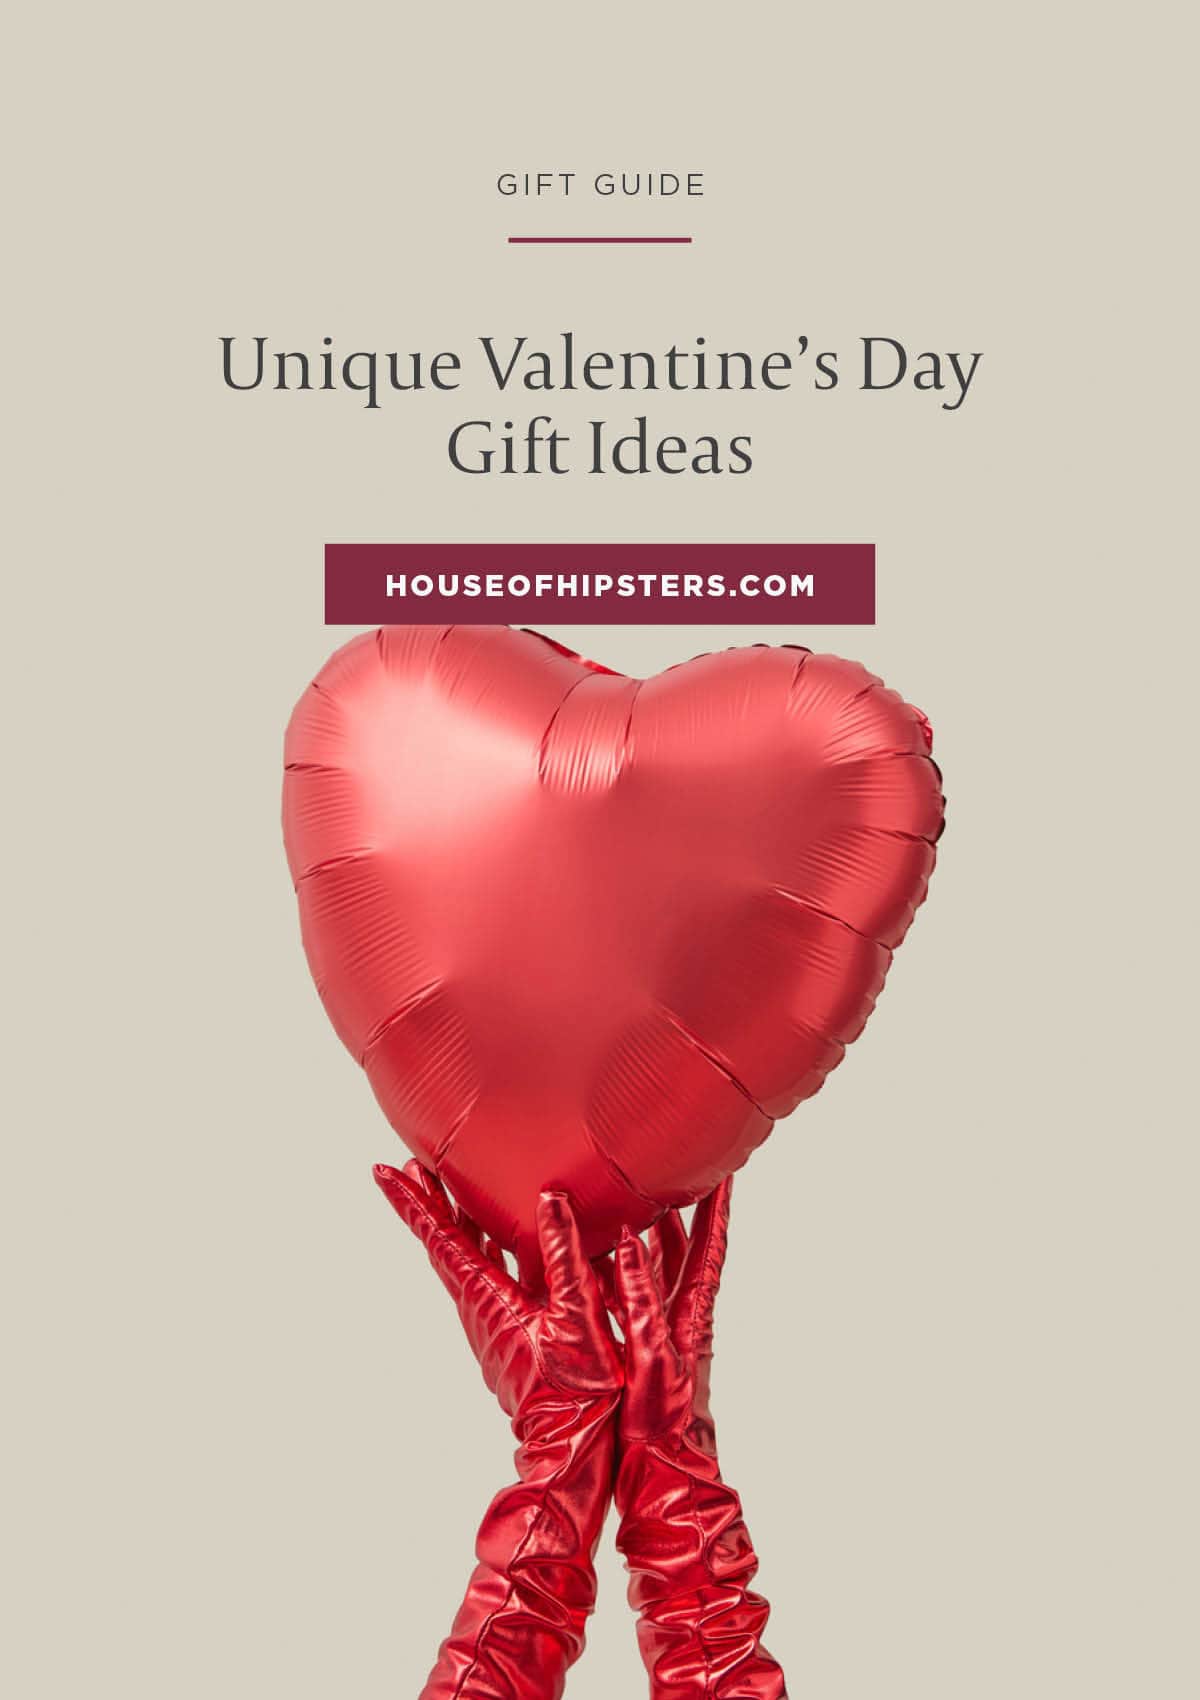 Unique Valentine's Day gift ideas for her